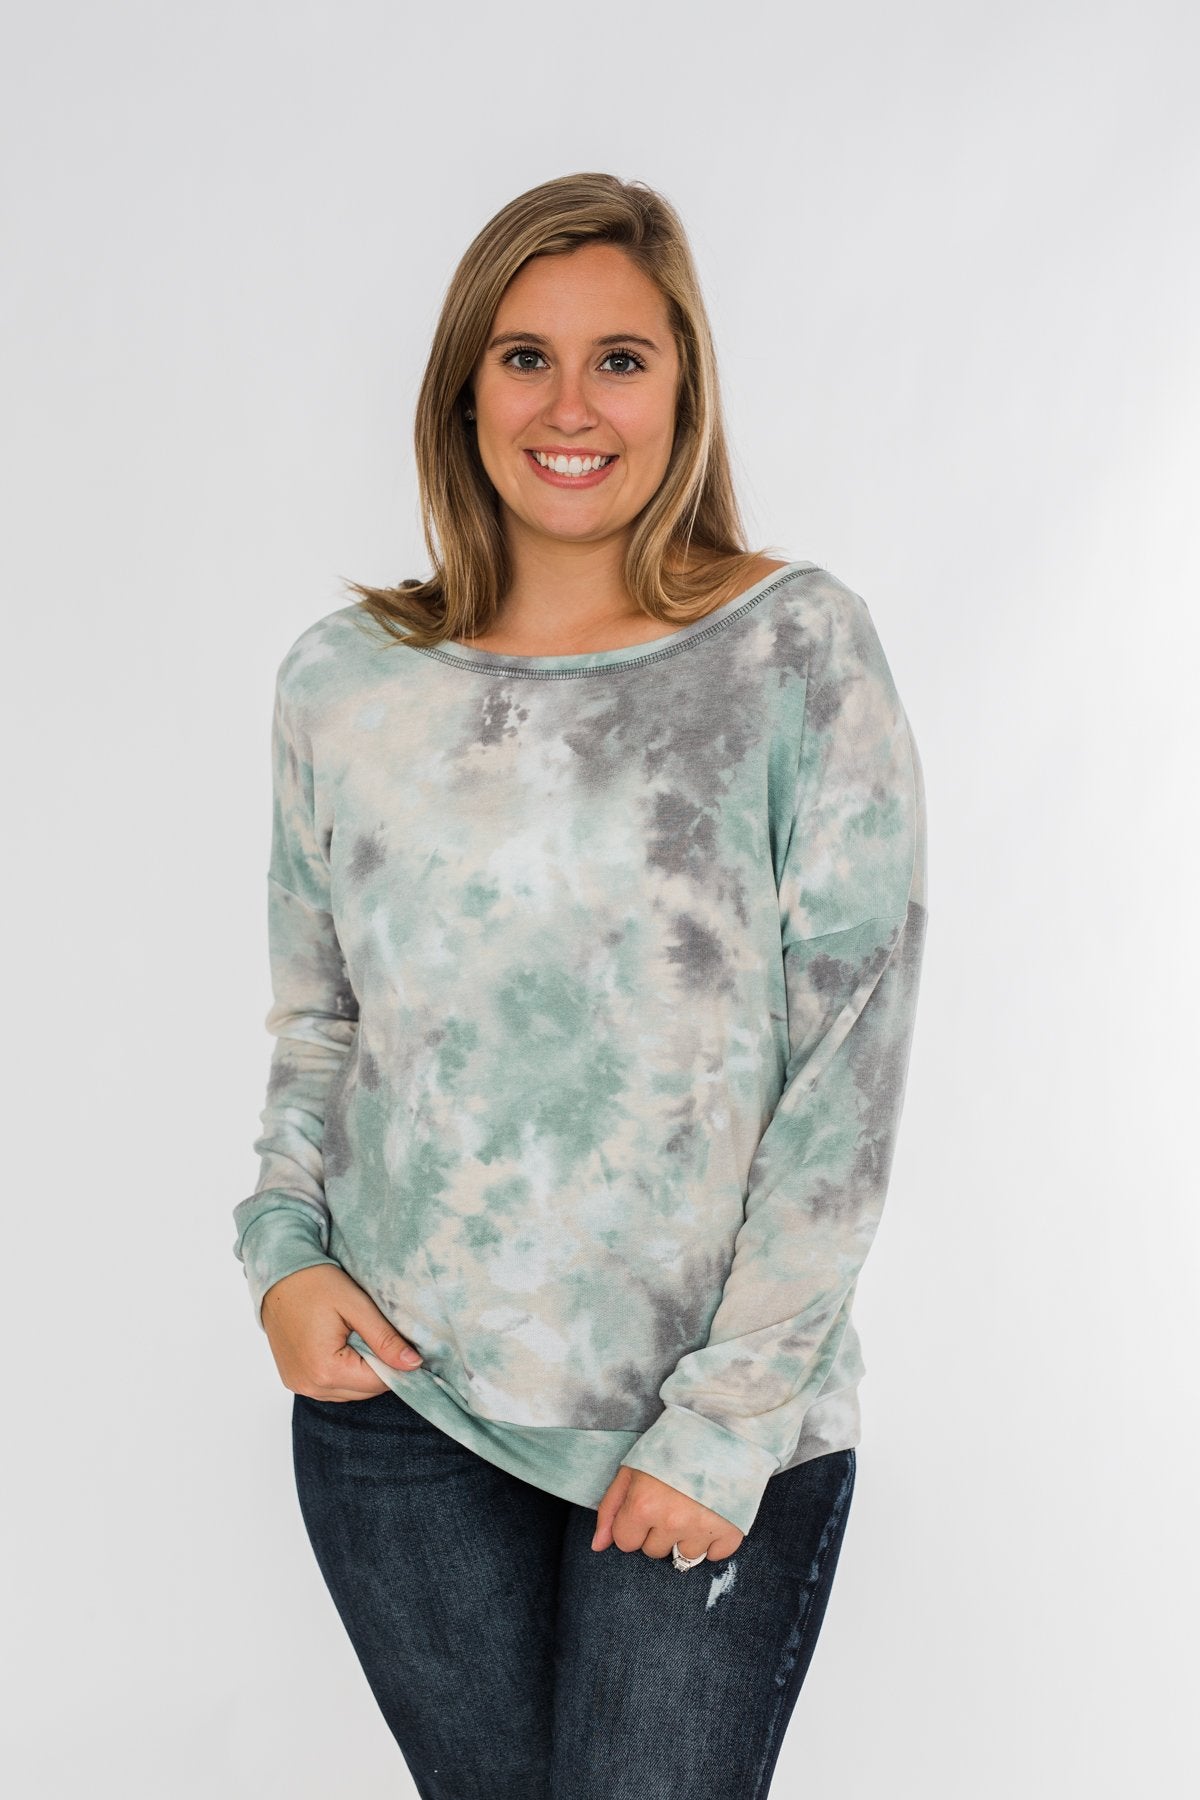 Lost In This Moment Tie Dye Pullover Top- Sage, Oatmeal, Grey